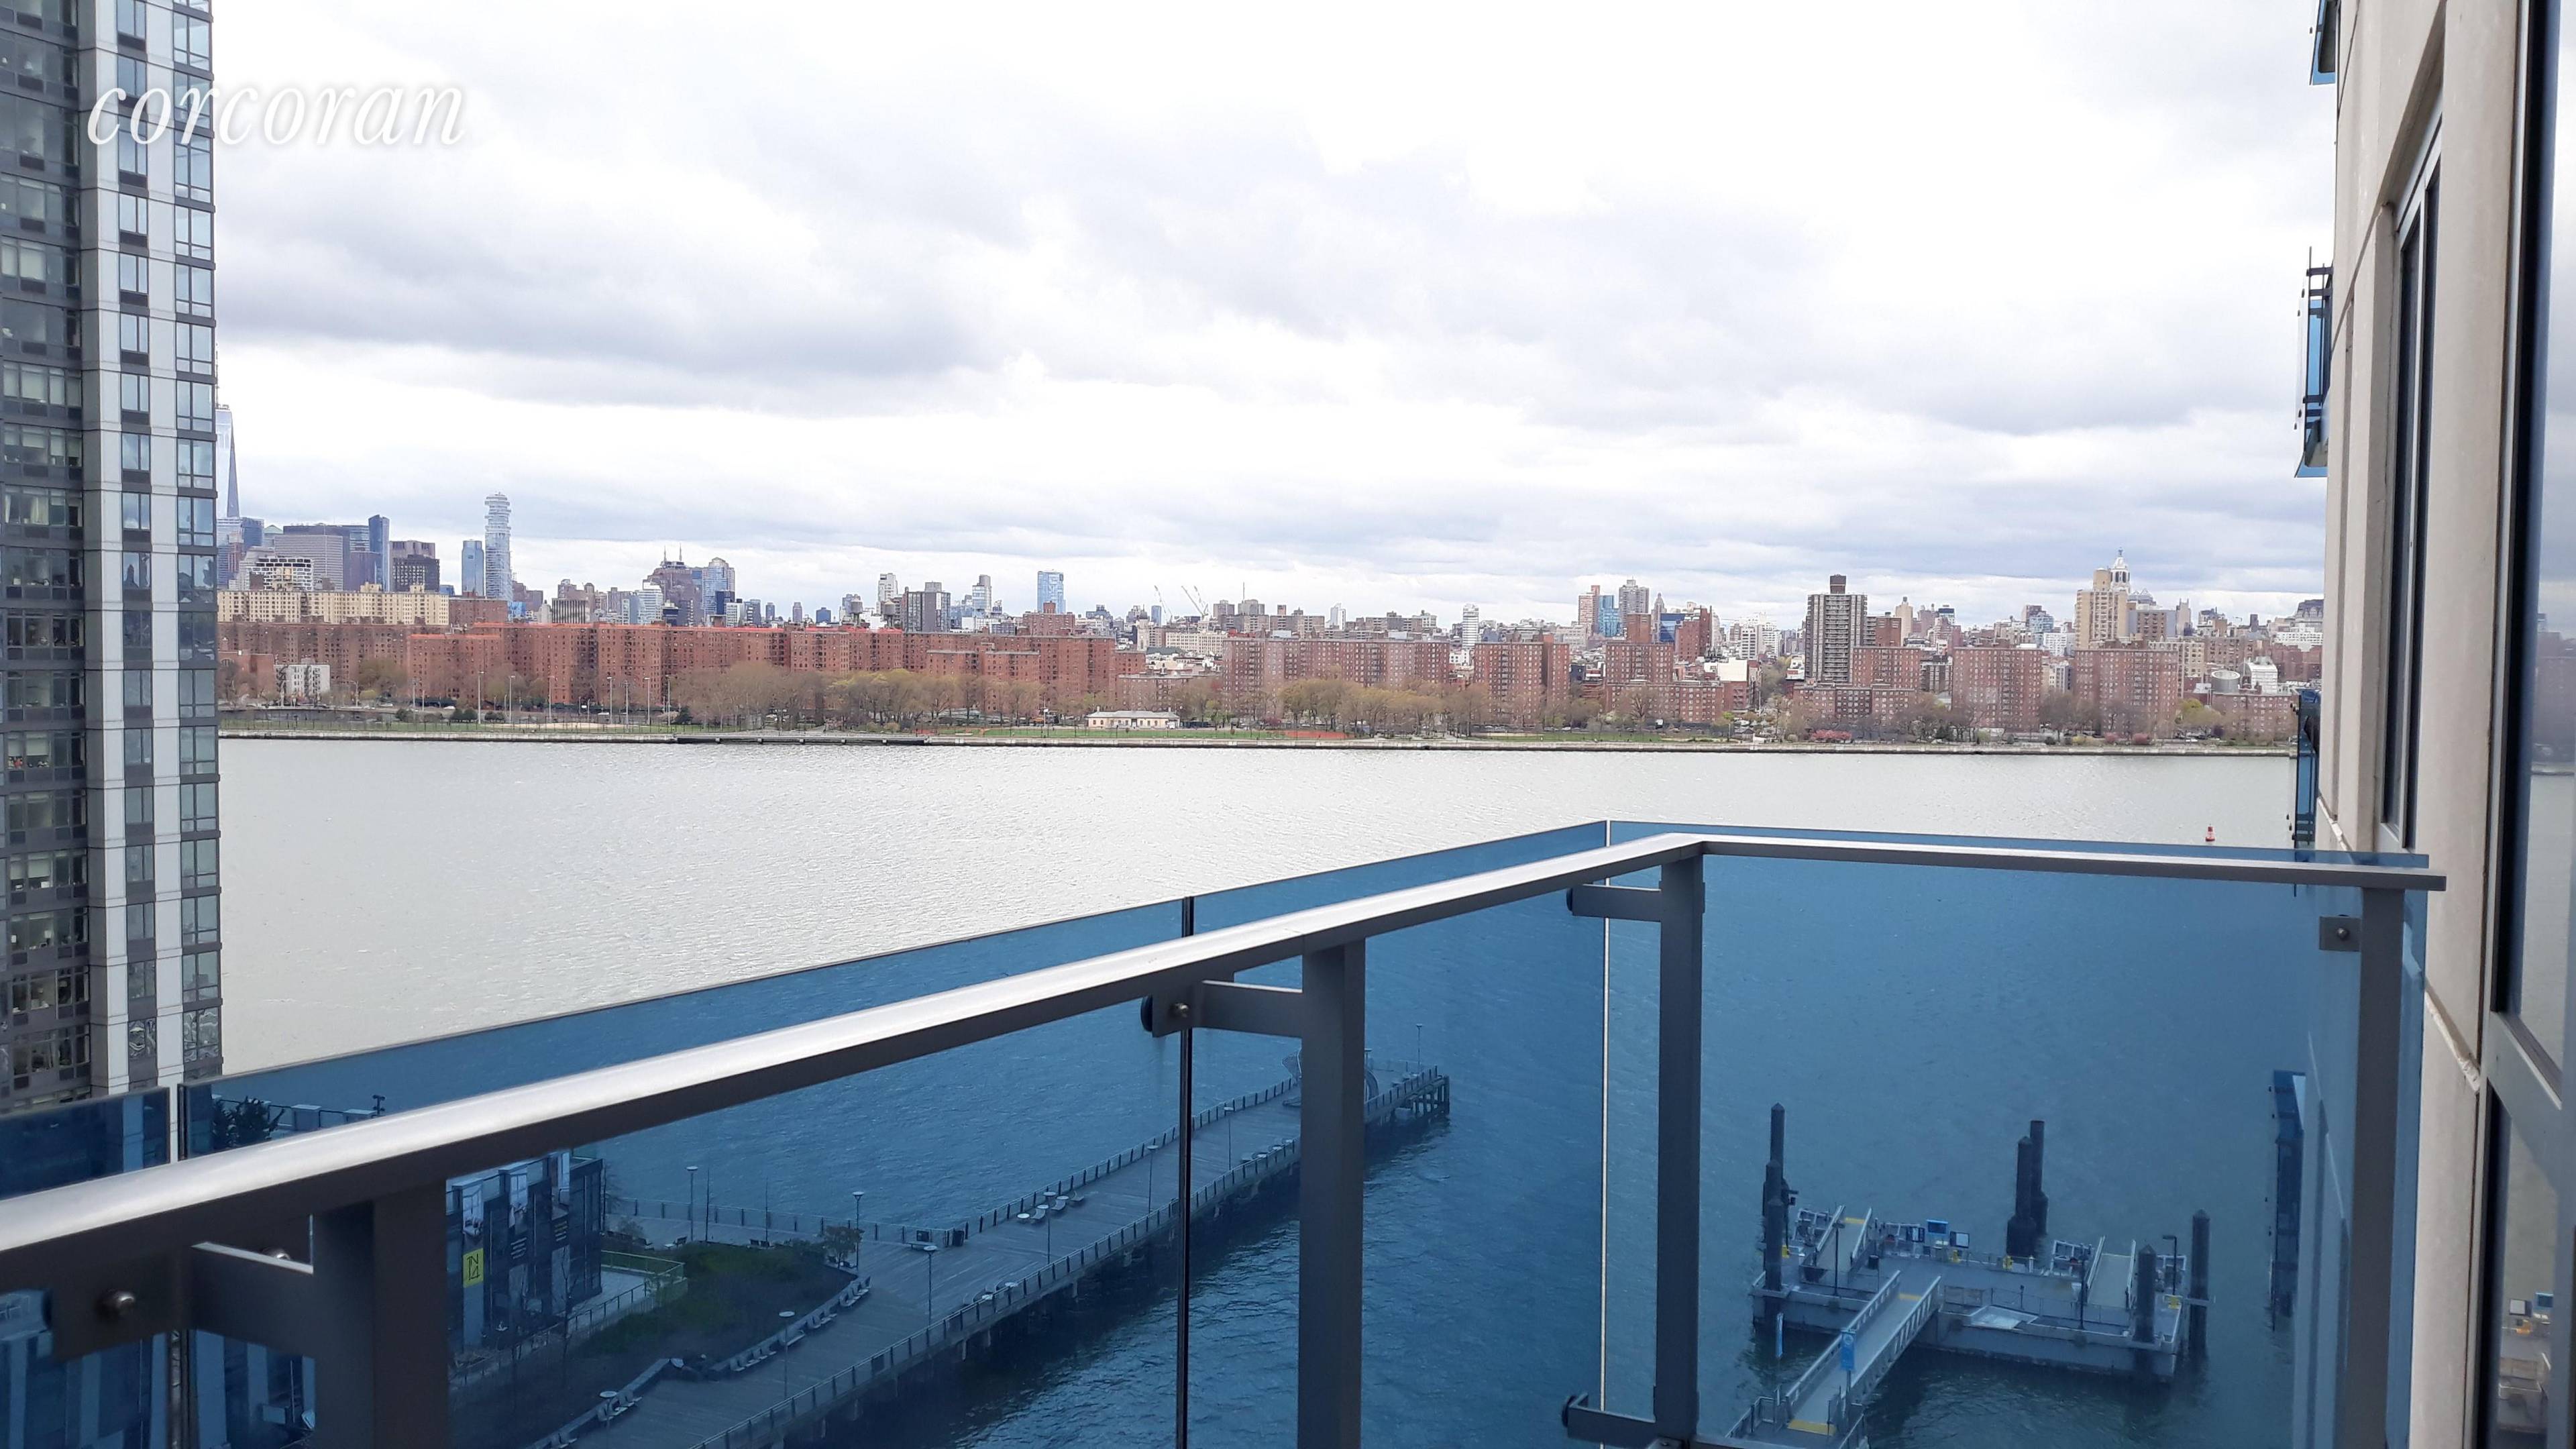 contact me to view multiple videos Welcome to the EDGE, the most sought after full service building in Williamsburg, simply the most amenitized luxury high rise in Brooklyn 24h doorman ...